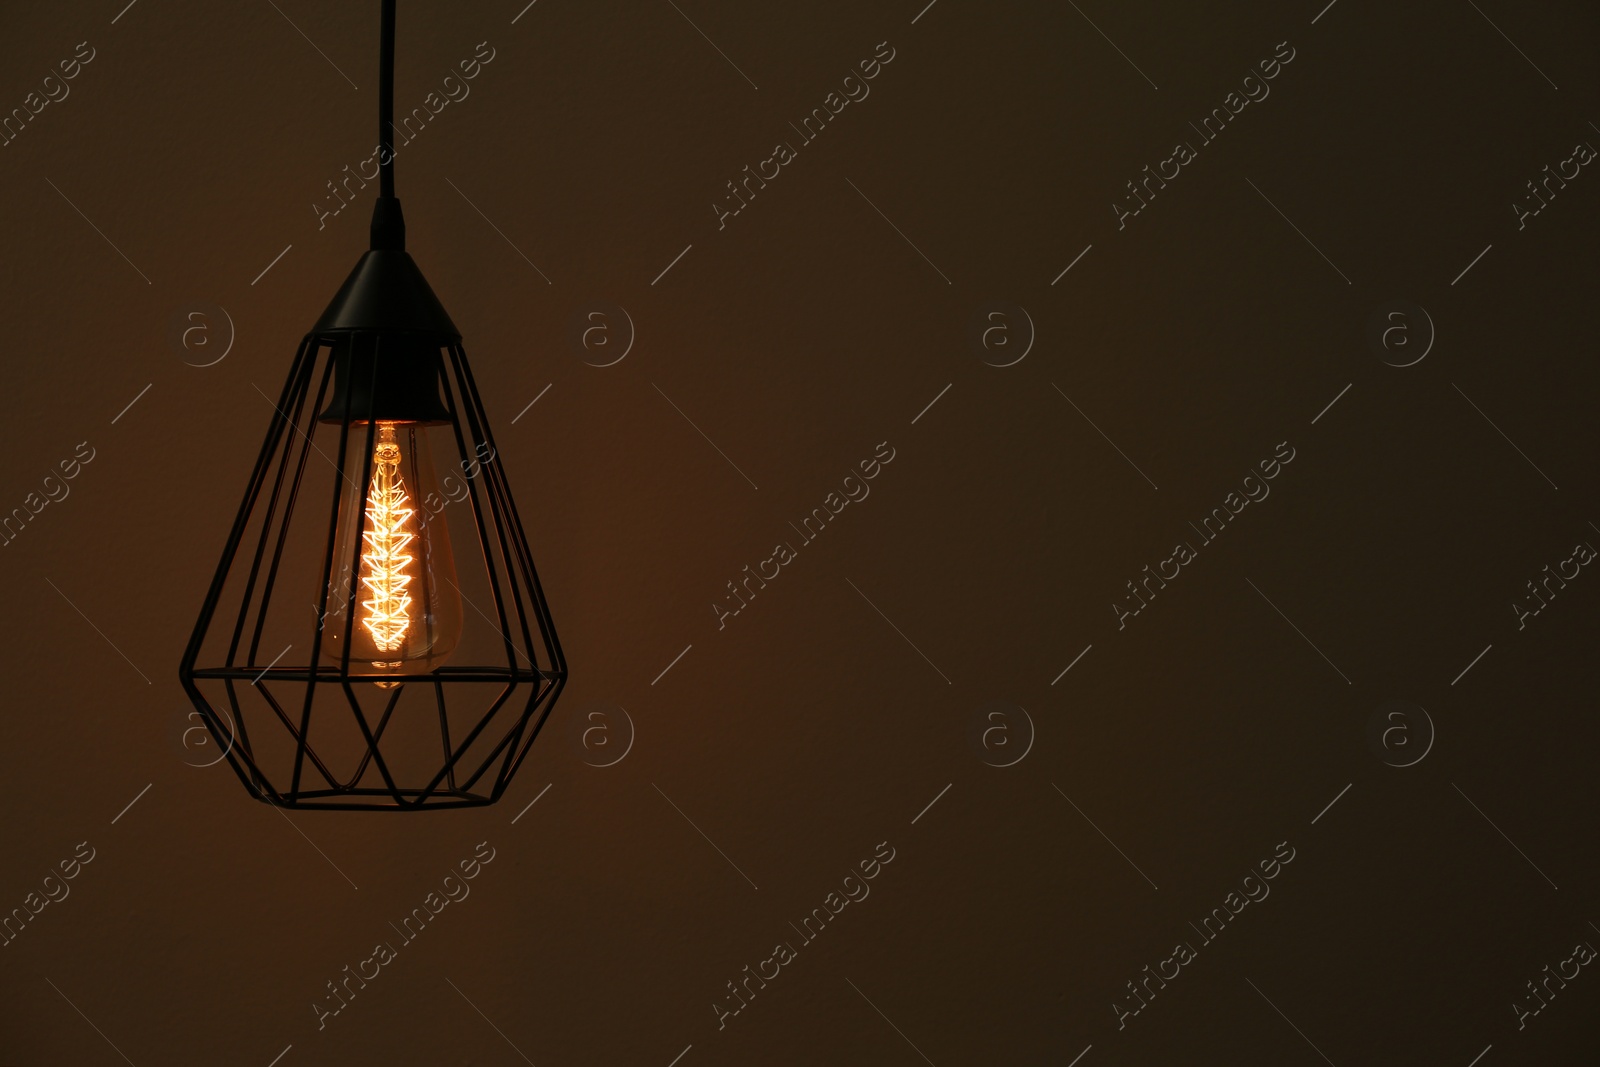 Photo of Hanging lamp bulb in chandelier against dark background, space for text